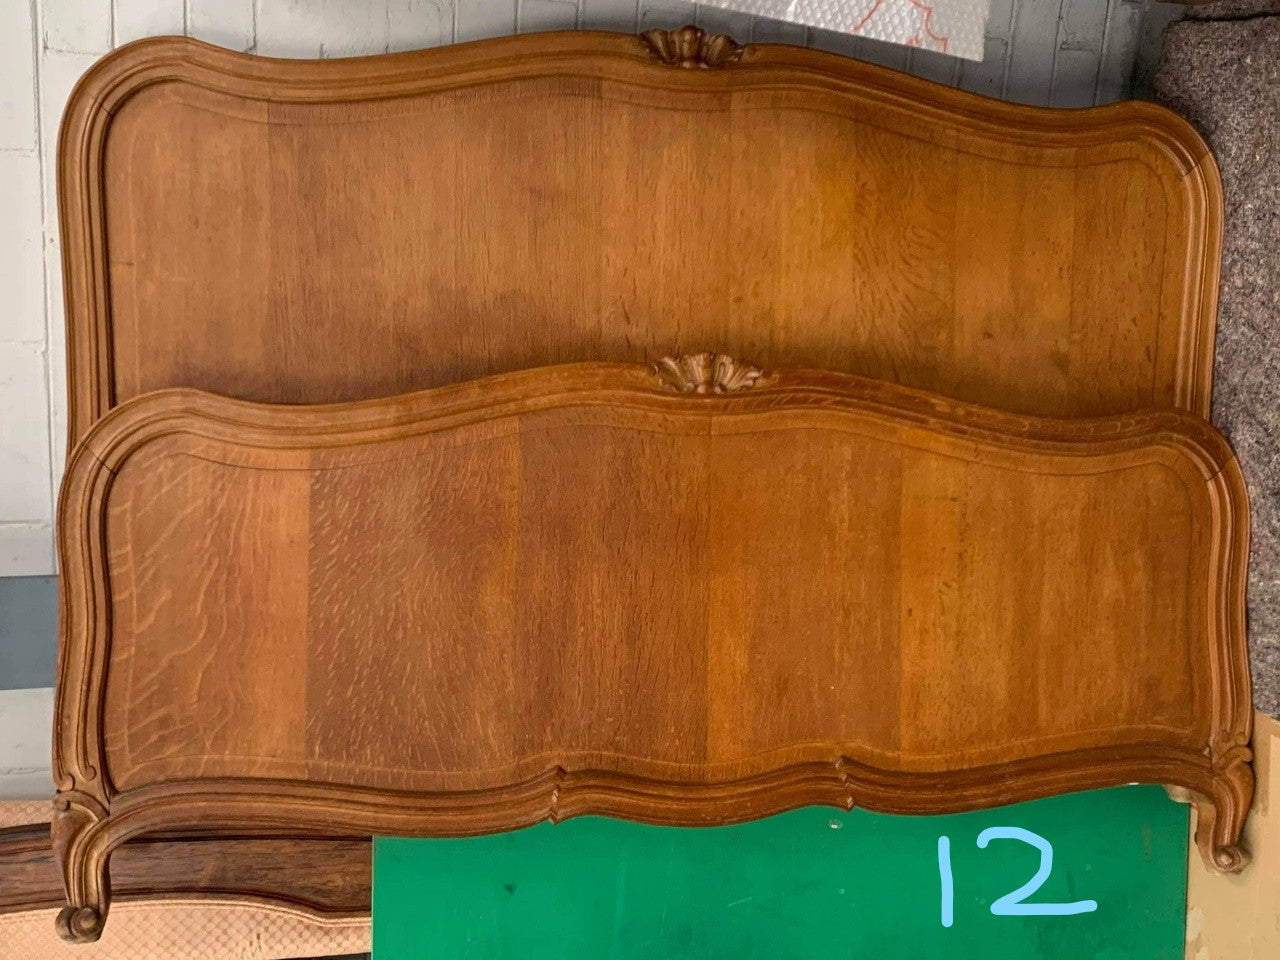 We currently have a range of Antique French Queen size beds instock, yet to be restored/listed on our website.

If you are looking for a bed please contact us for further information and pictures of our current range.